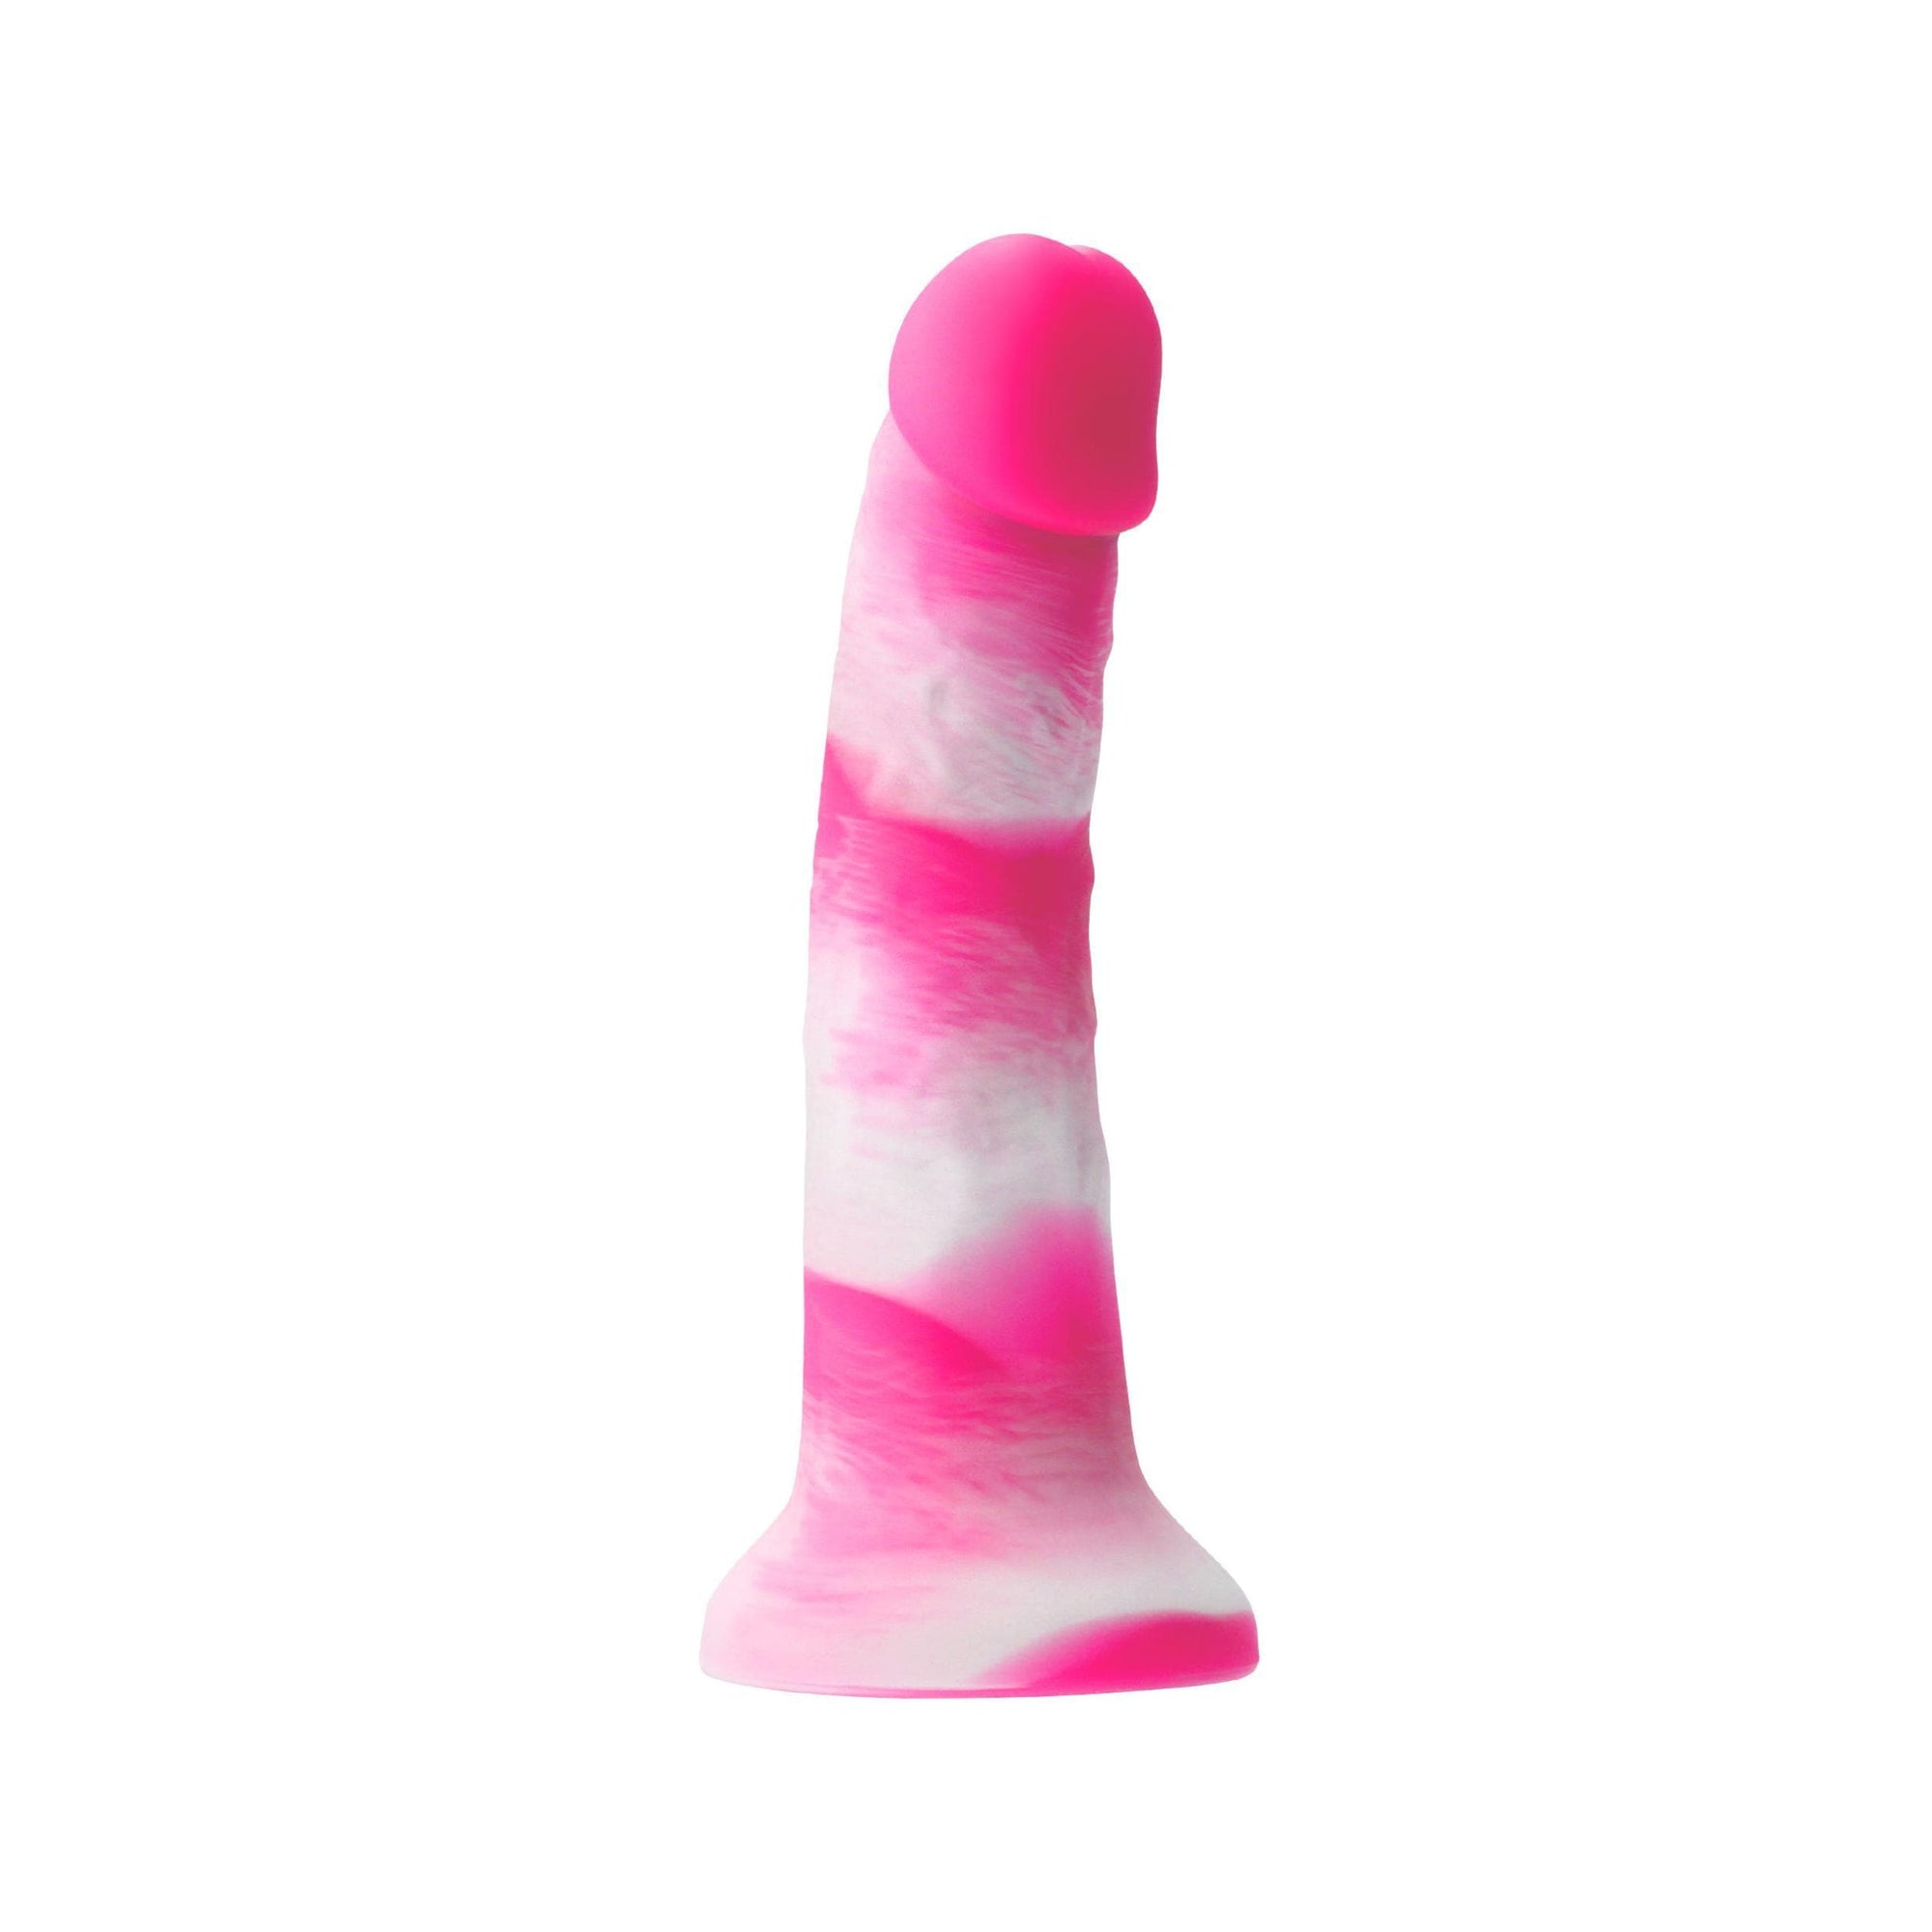  Suction Mounted Dildos